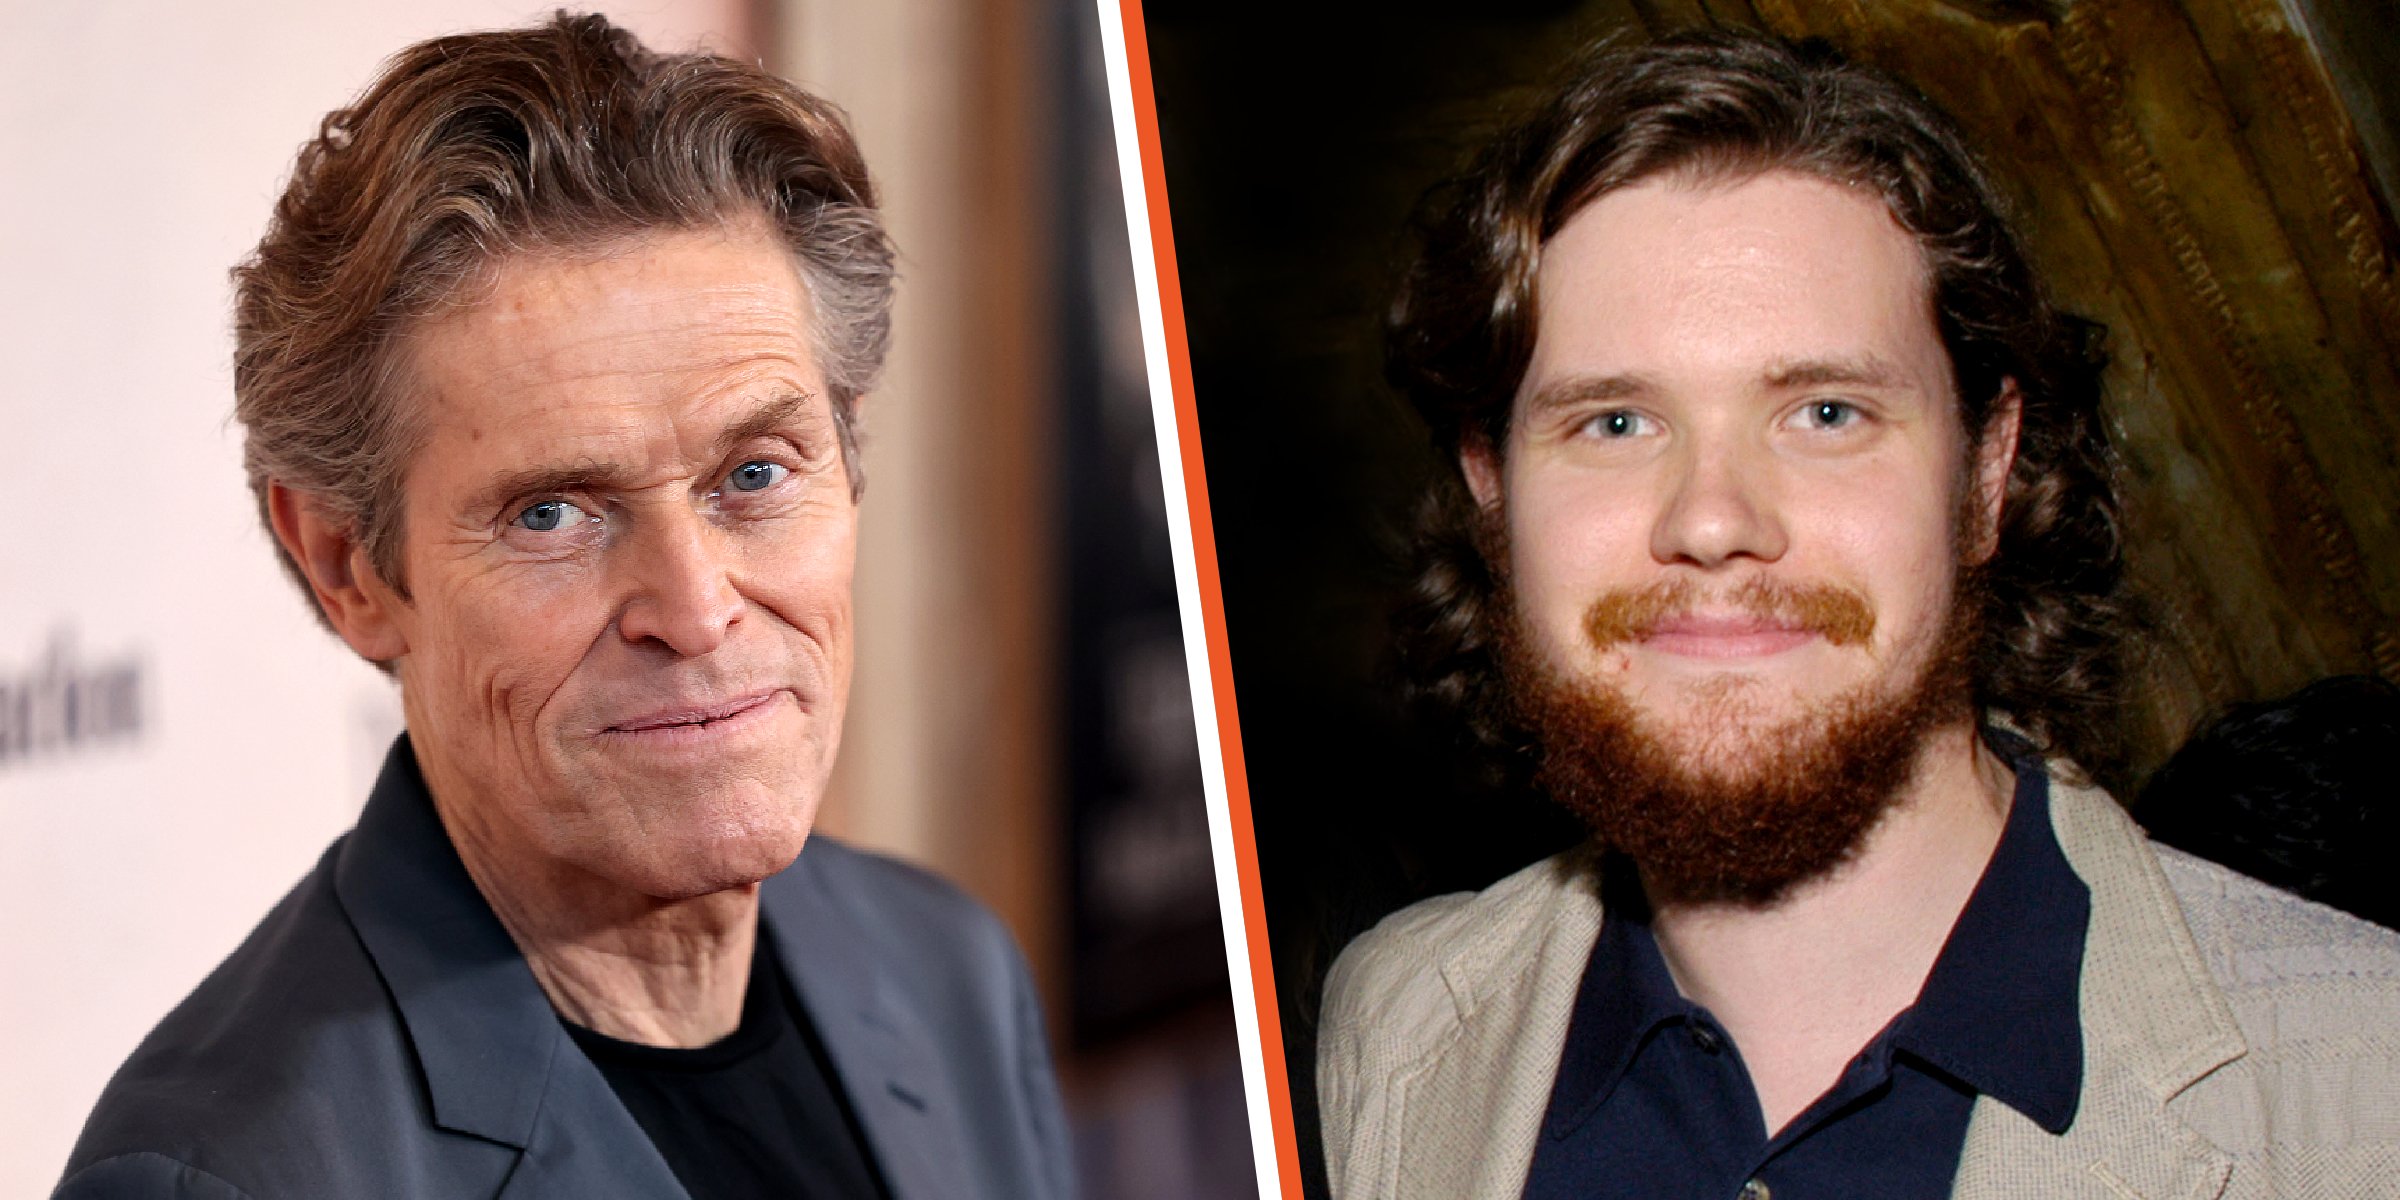 Jack Dafoe Is Willem Dafoe's Only Son Who's Not Interested in Acting